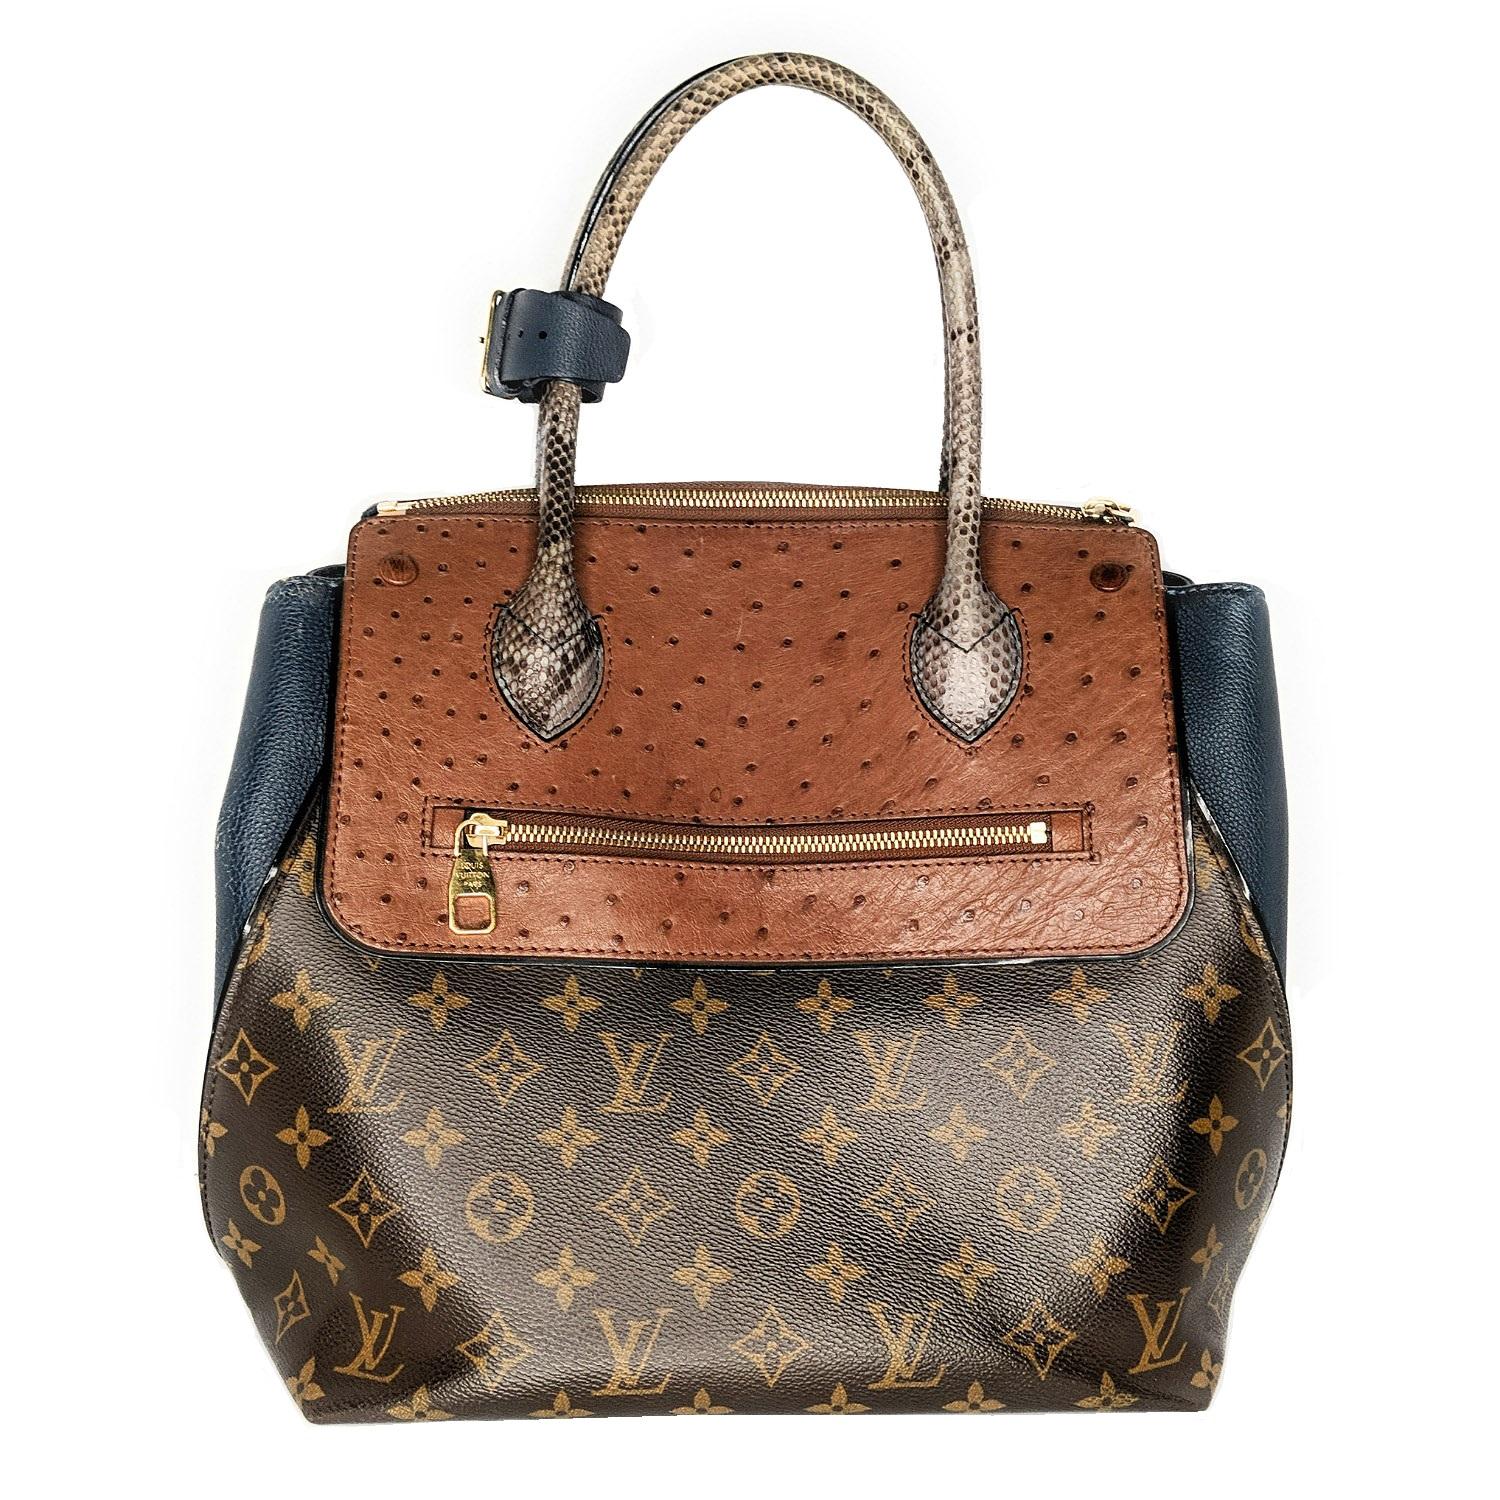 This stylish tote has a body of Louis Vuitton monogram on toile canvas. The bag features rolled python top handles with expandable full grain blue calfskin leather sides. There is a rear backing and zipper pocket and a cross-over flap of ostrich